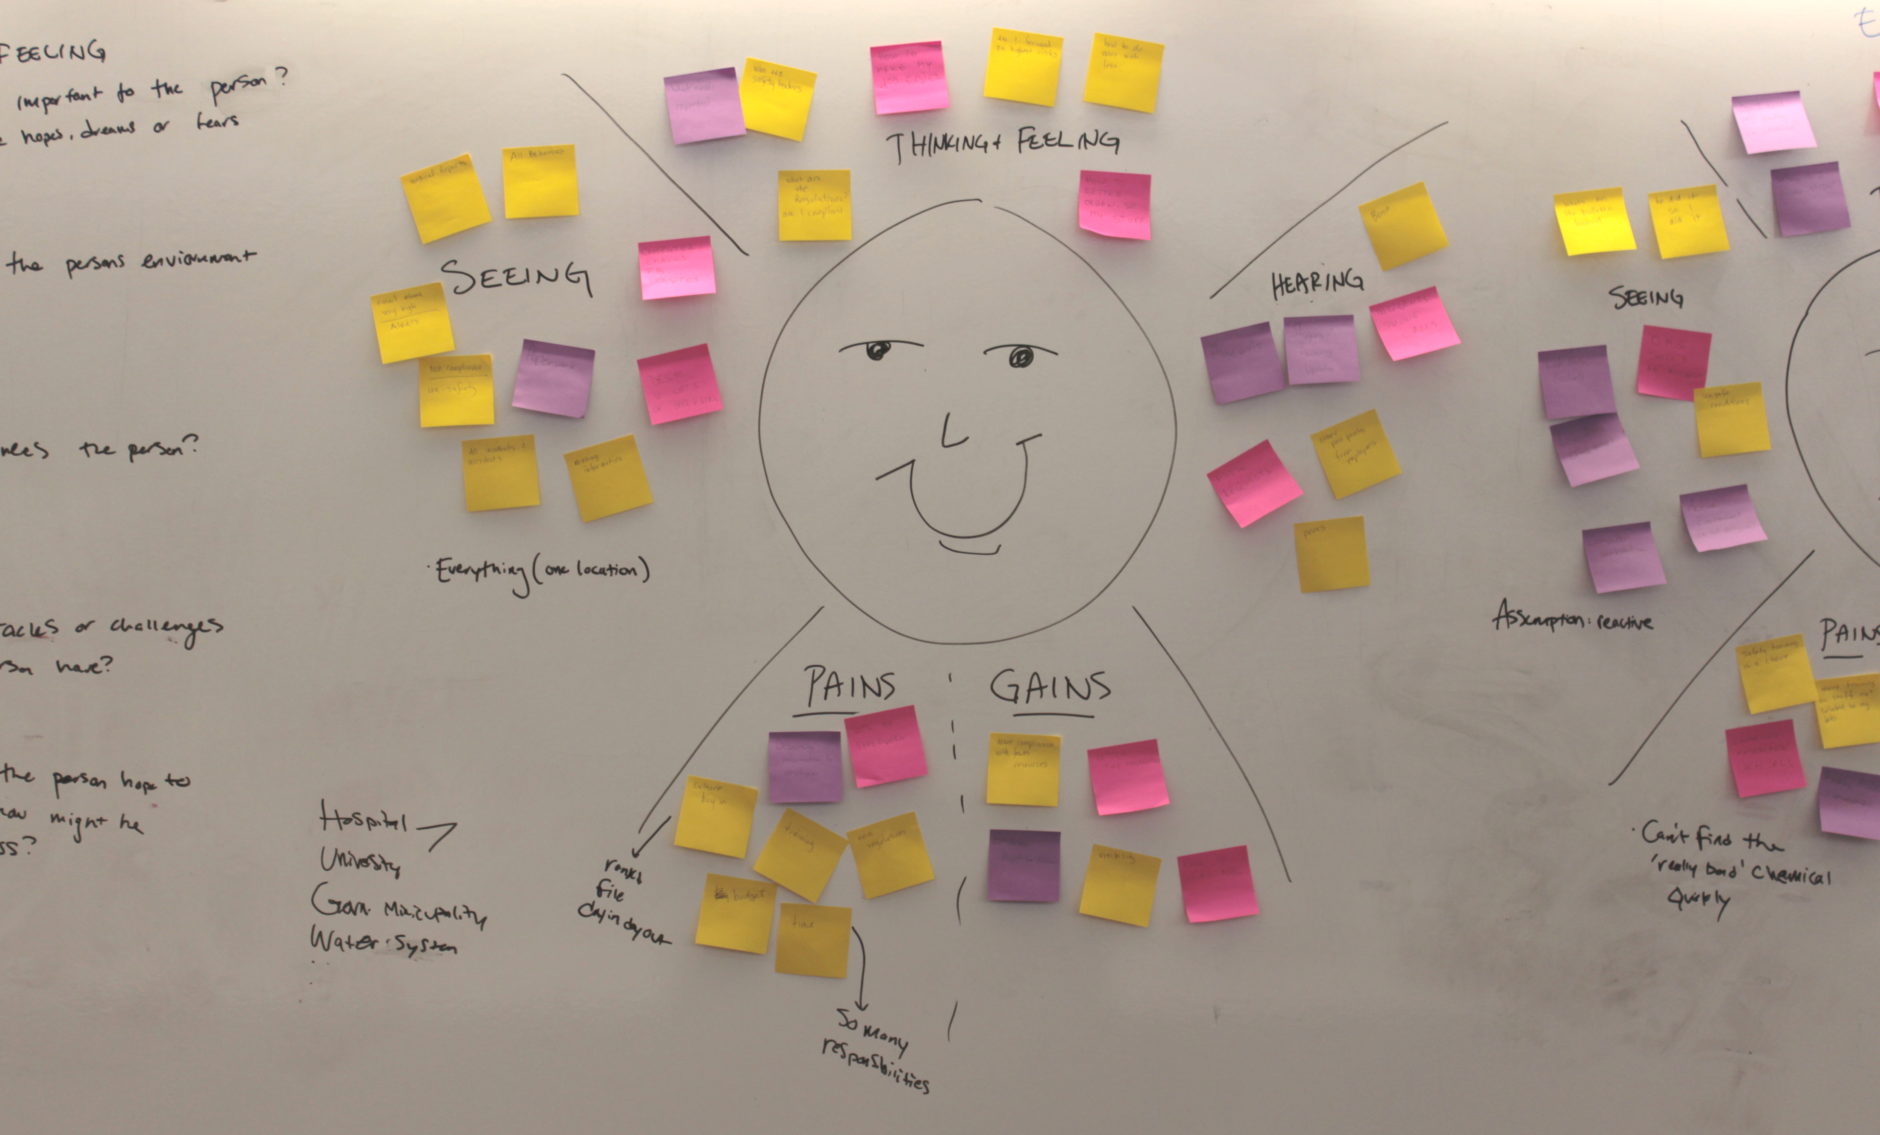 A whiteboard during an Empathy Mapping activity. In the middle of the whiteboard is a smiley face. The space around the face is divided into 5 sections labeled Seeing, Thinking and Feeling, Hearing, Pains, and Gains. In each of these sections are a number of yellow, purple, and pink sticky notes.